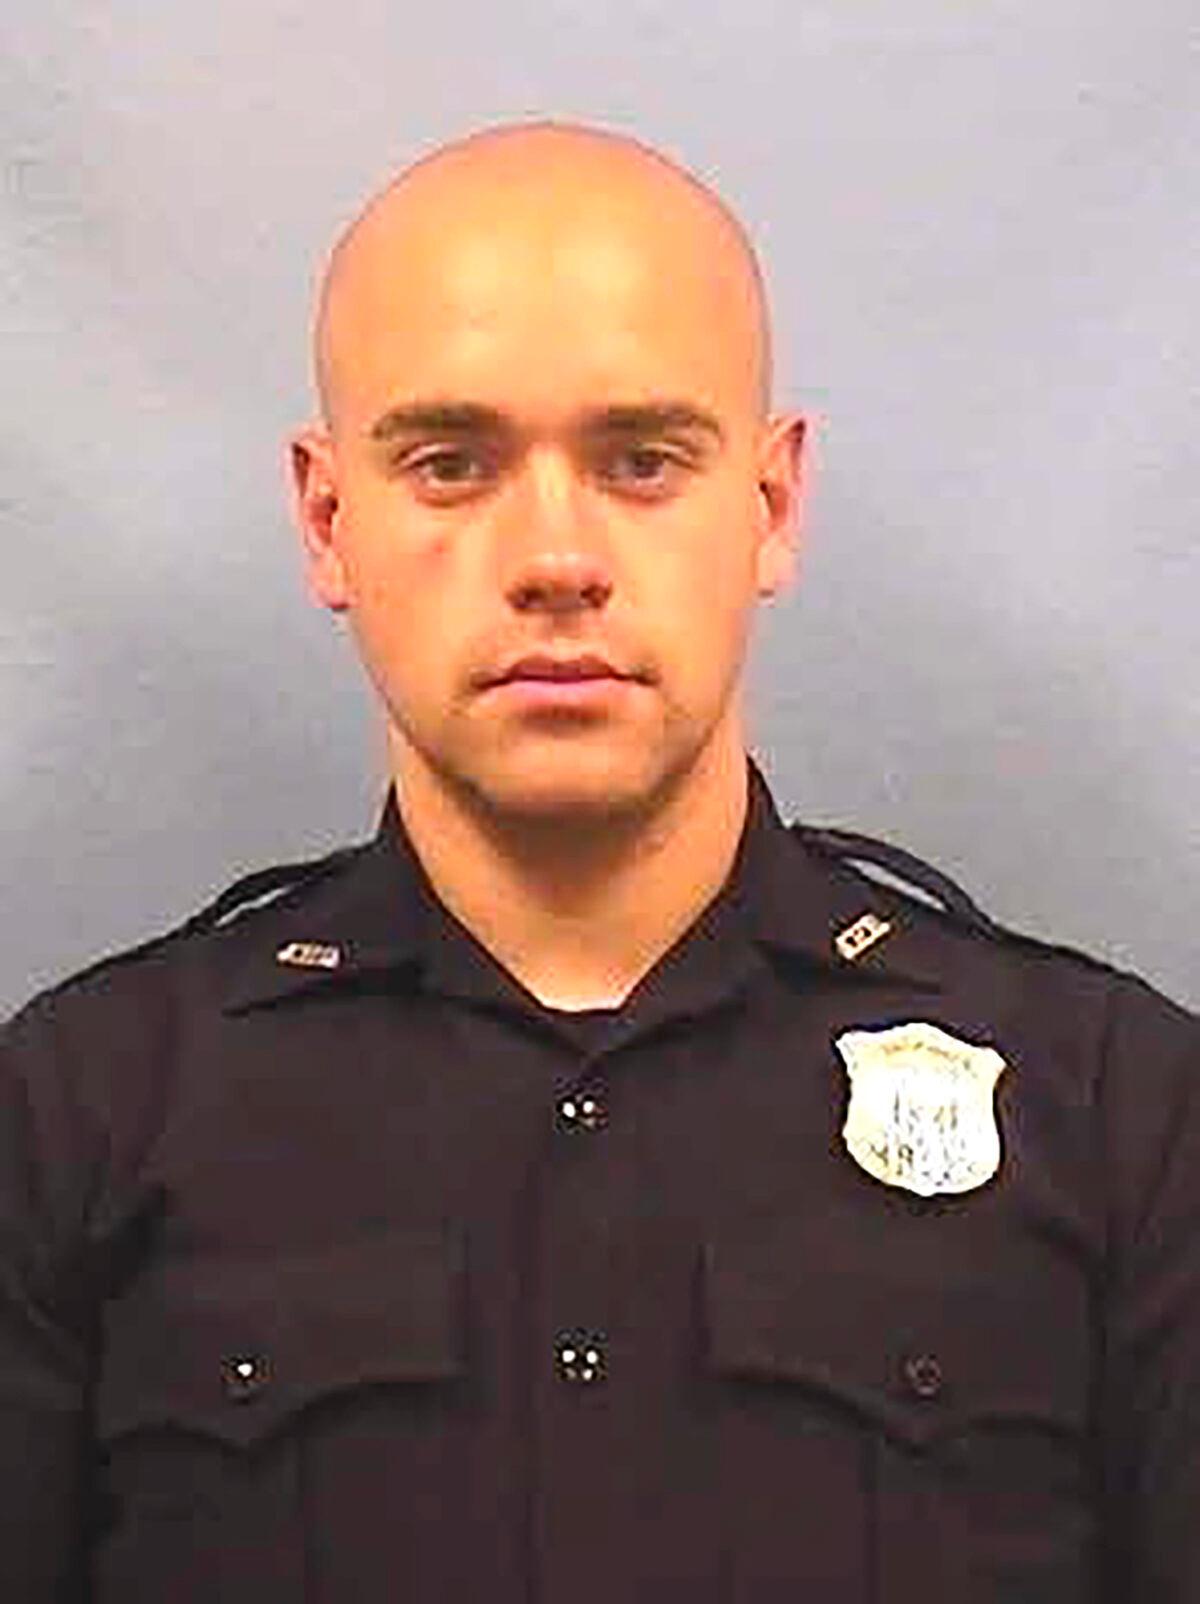 Then-Atlanta Police Department officer Garrett Rolfe, who was fired after the shooting death of 27-year-old Rayshard Brooks, in an undated photograph released in Atlanta, Ga., June 14, 2020. (Atlanta Police Department via Reuters)